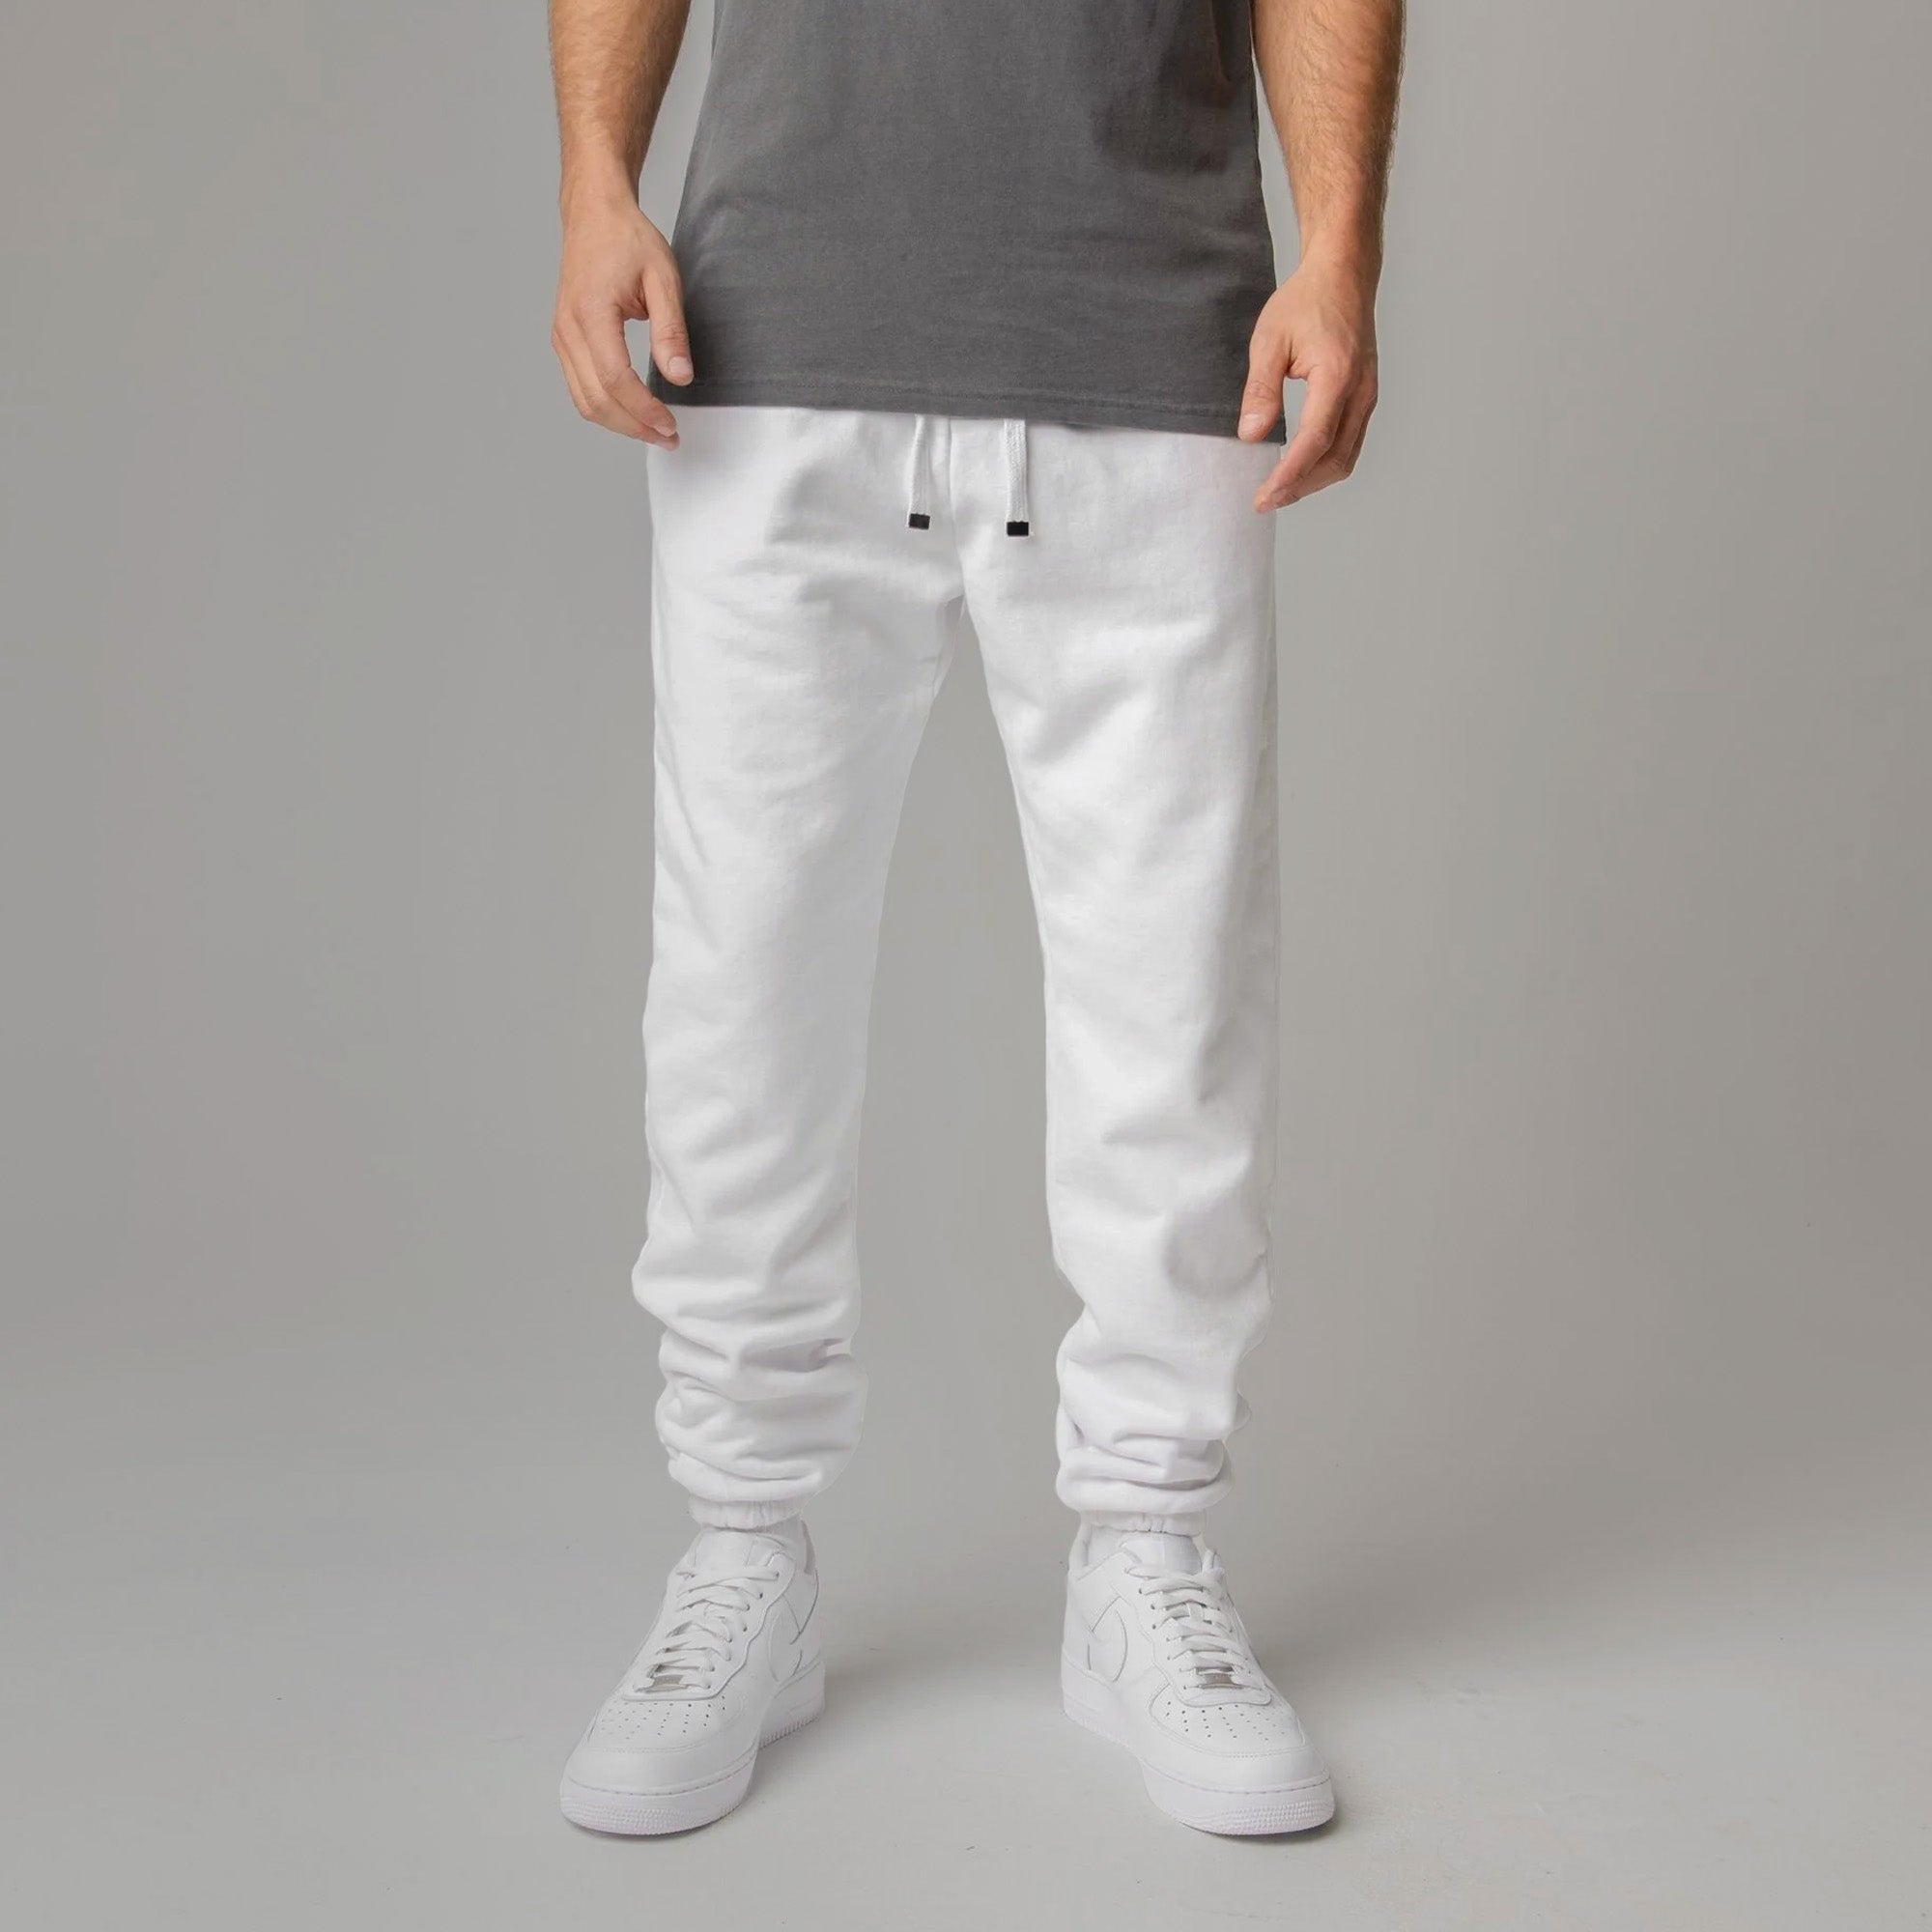 5 White Pants Outfits For Men | White pants men, Pants outfit men, Mens  outfits